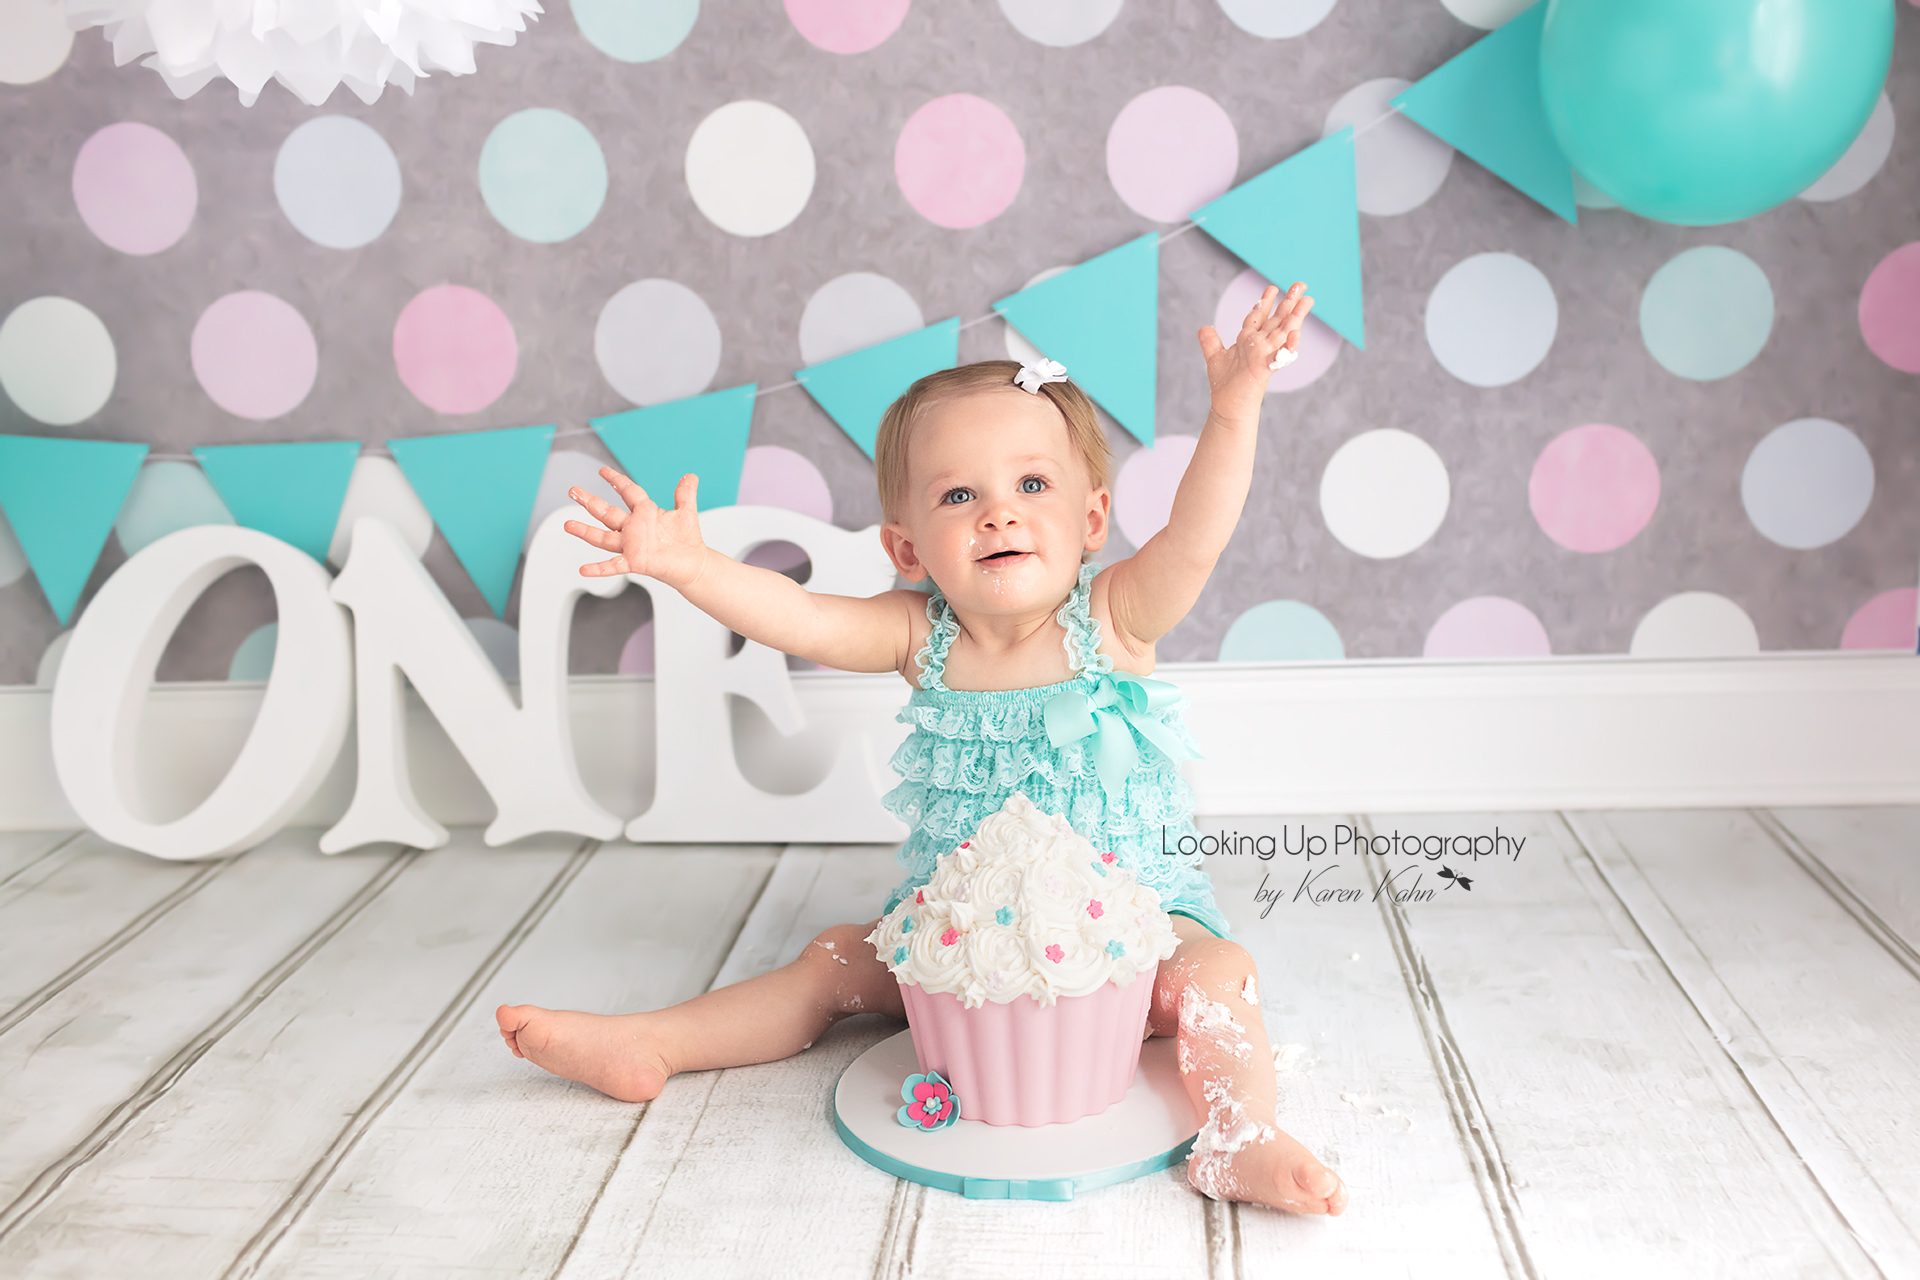 Green and pink themed cake smash session for one year old milestone baby girl looking sweet in lace with polka dots for 12 month portrait